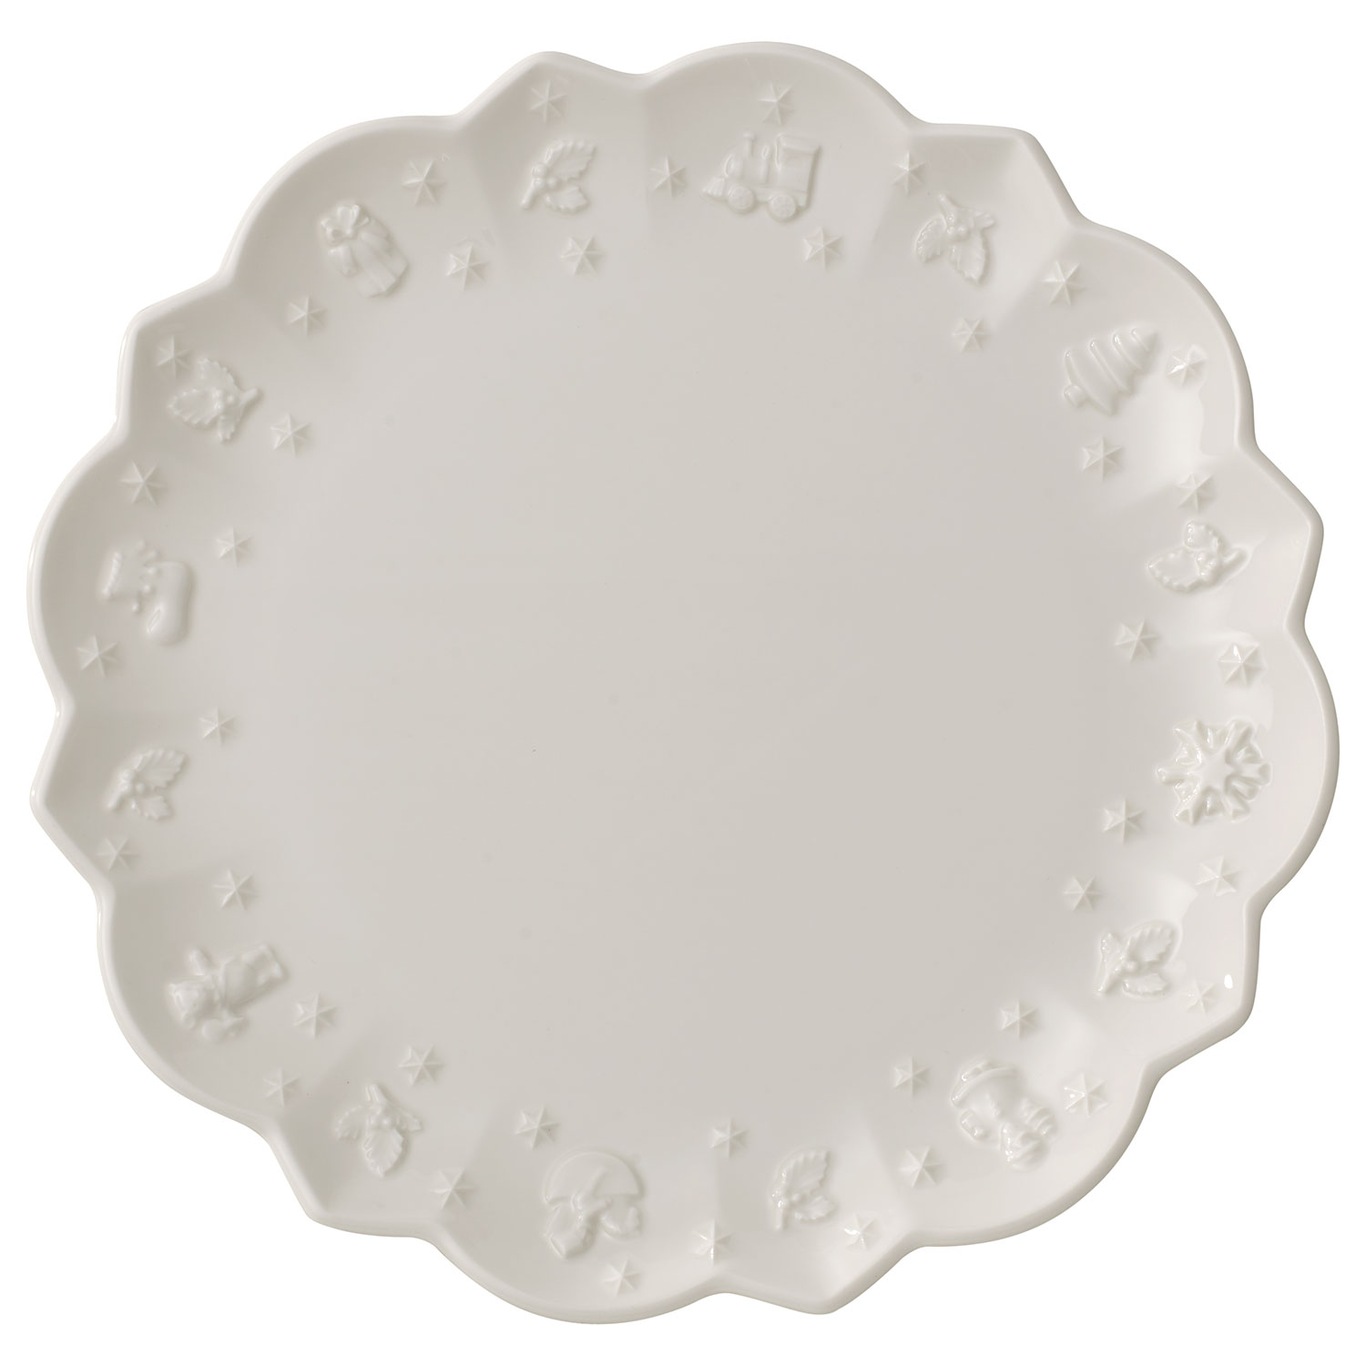 Toy's Delight Royal Classic Breakfast Plate, 23 cm